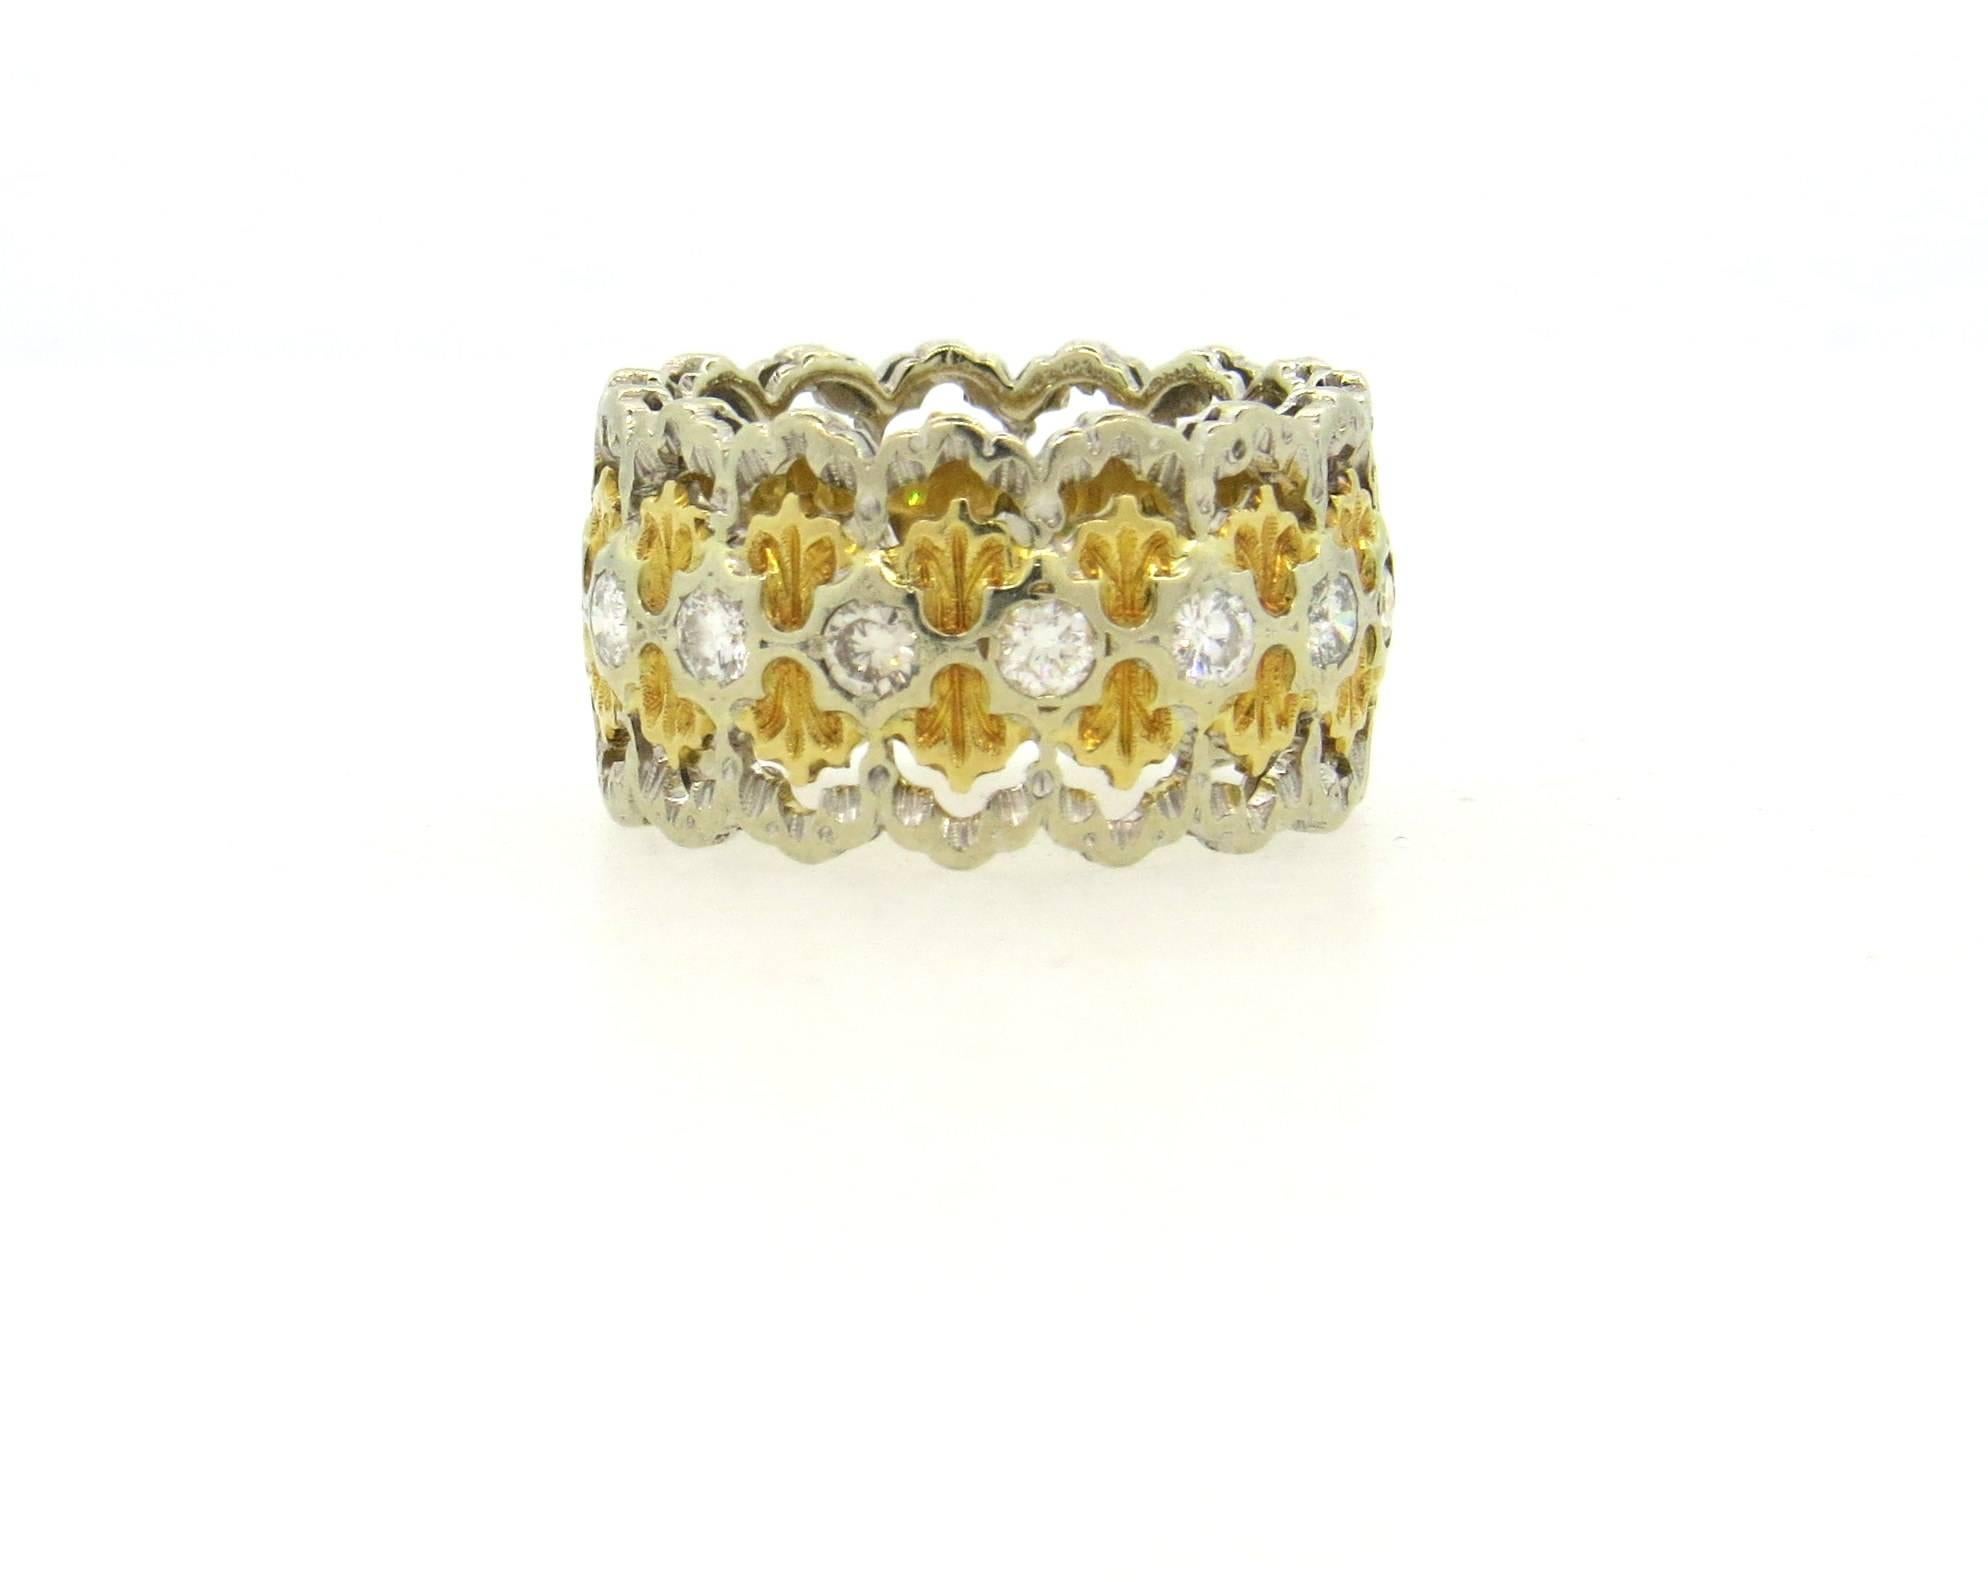 Vintage Buccellati band ring, set in 18k white and yellow gold, featuring approximately 0.56ctw in H/VS diamonds. Ring is a size 6 1/2, ring is 12mm wide.  Marked: Buccellati. Weight of the piece - 7.8 grams 